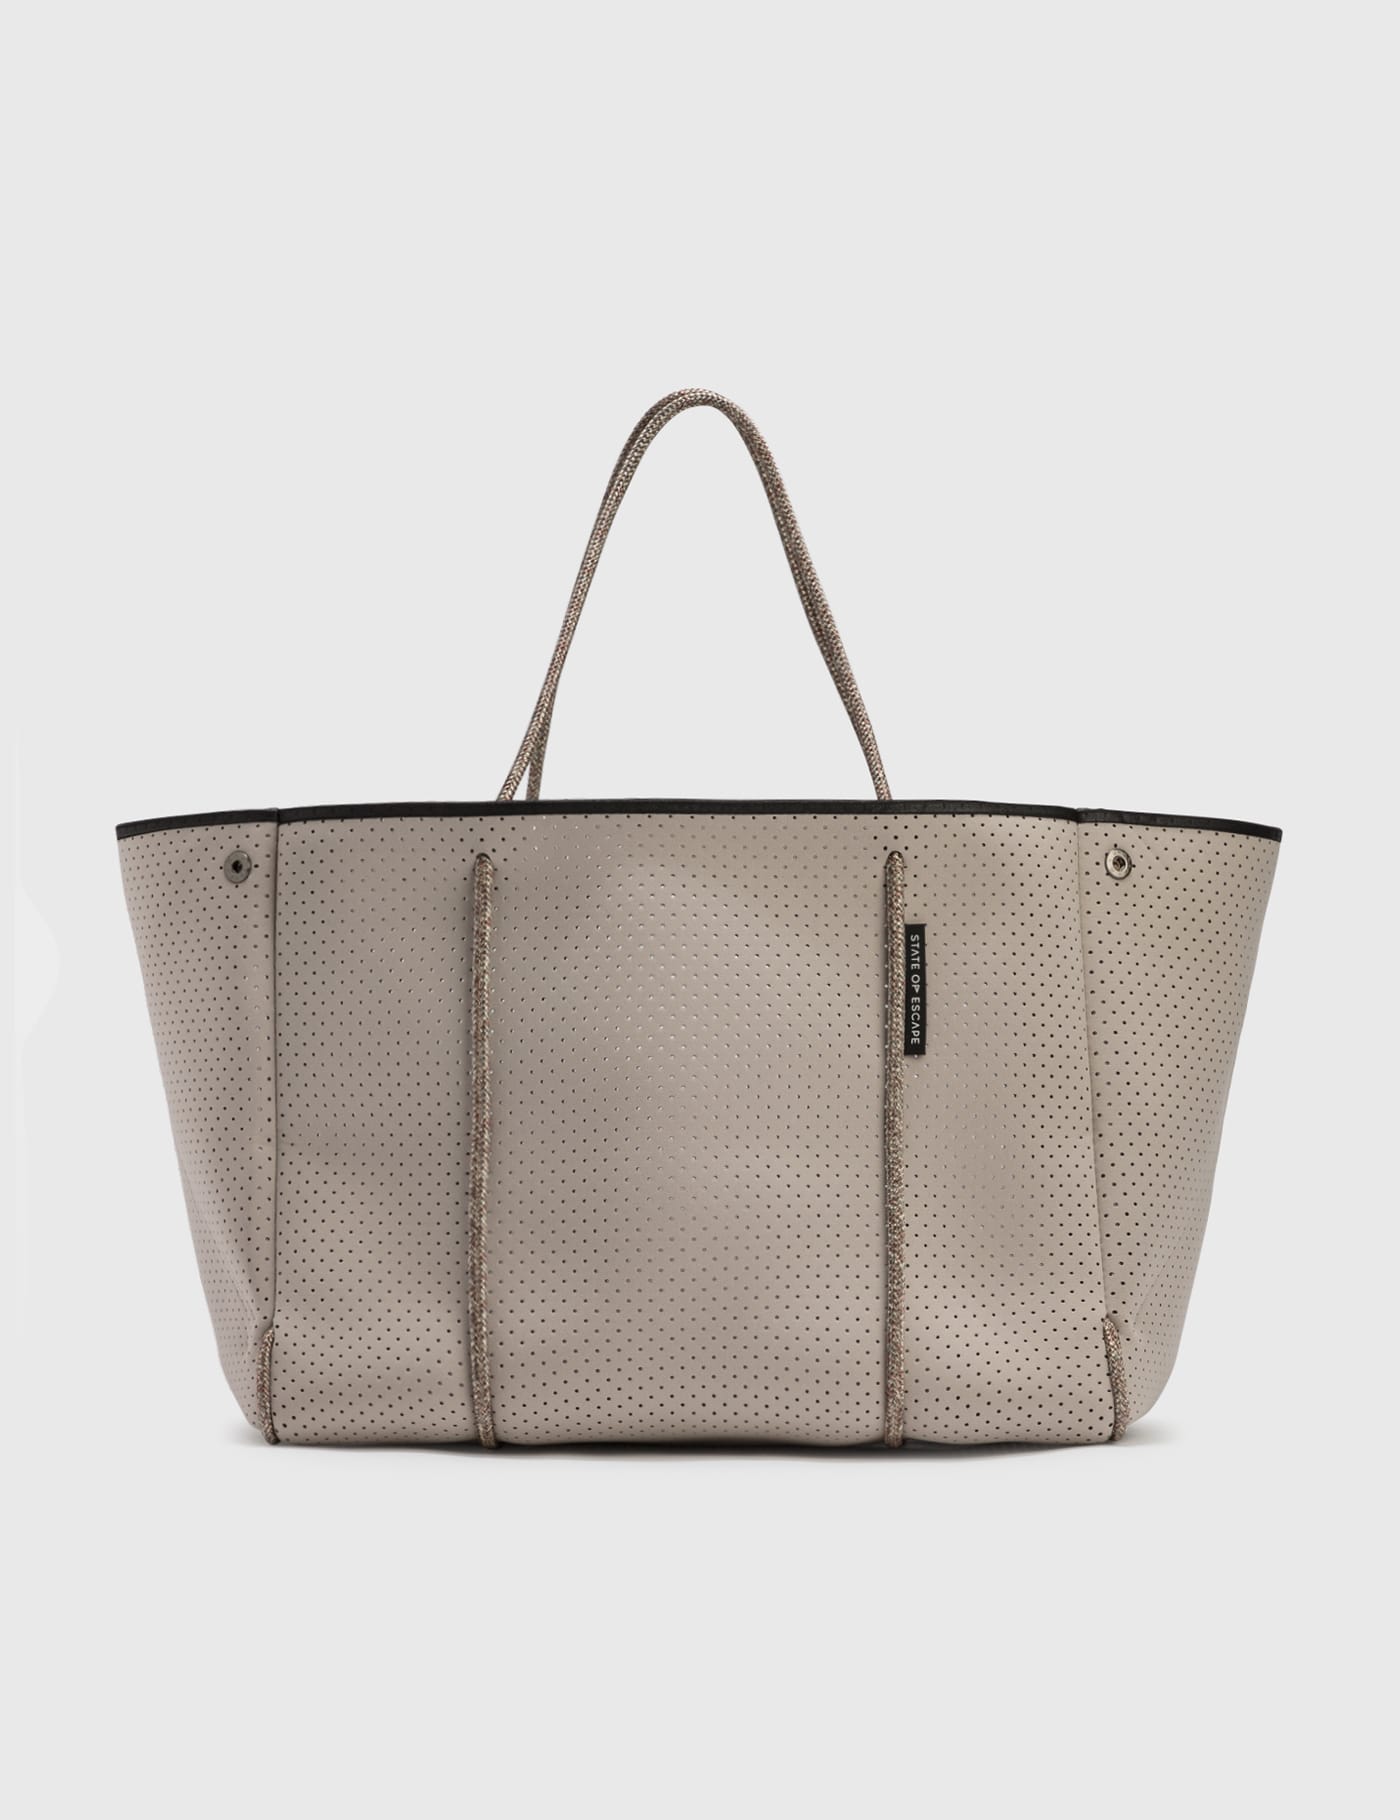 State of Escape - Escape Tote | HBX - Globally Curated Fashion and